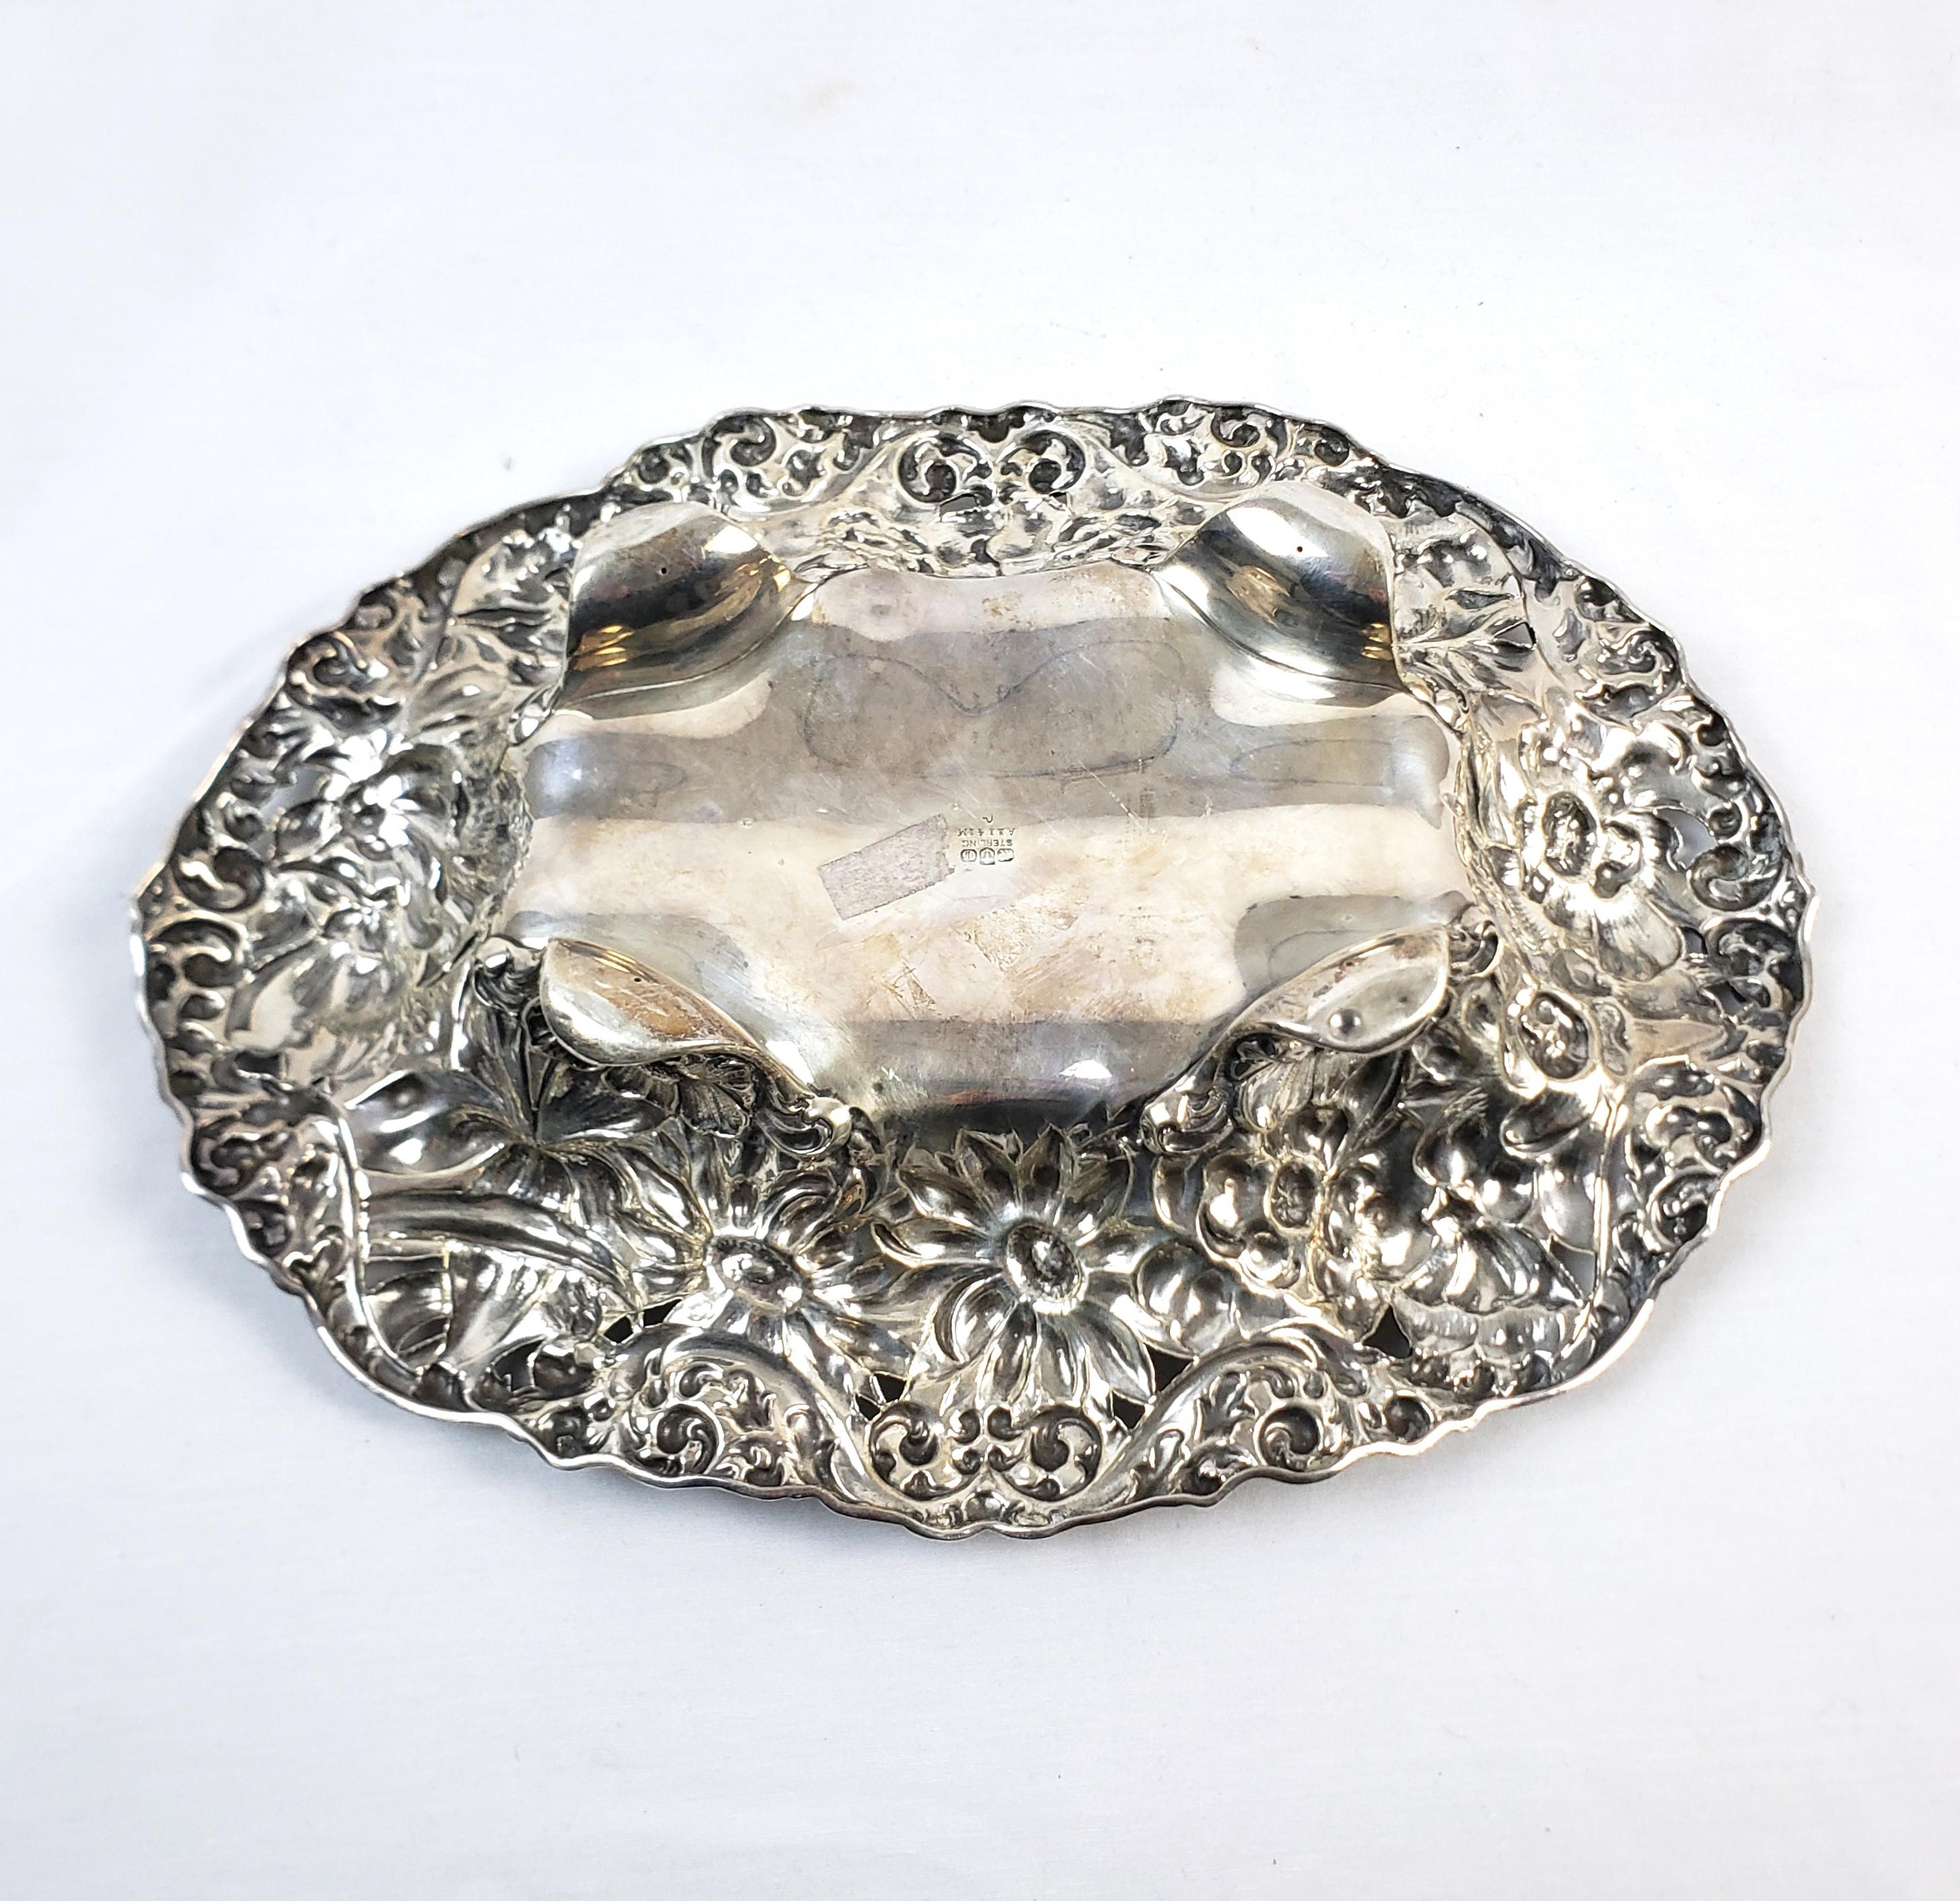 Antique Gorham Sterling Silver Bowl with Ornate Chased Floral Decoration For Sale 6